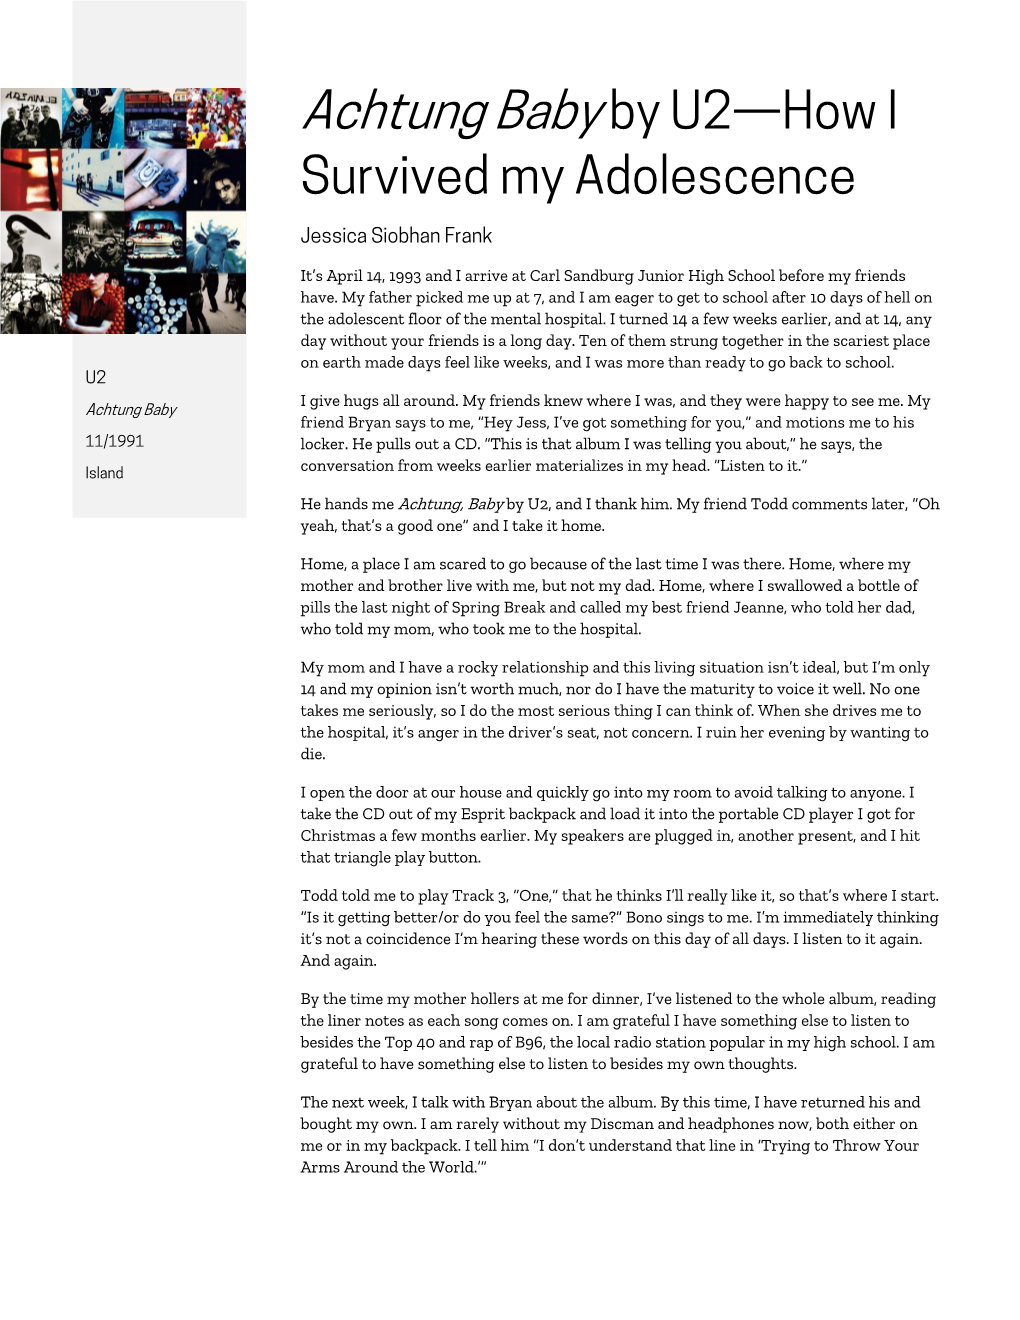 Achtung Babyby U2—How I Survived My Adolescence